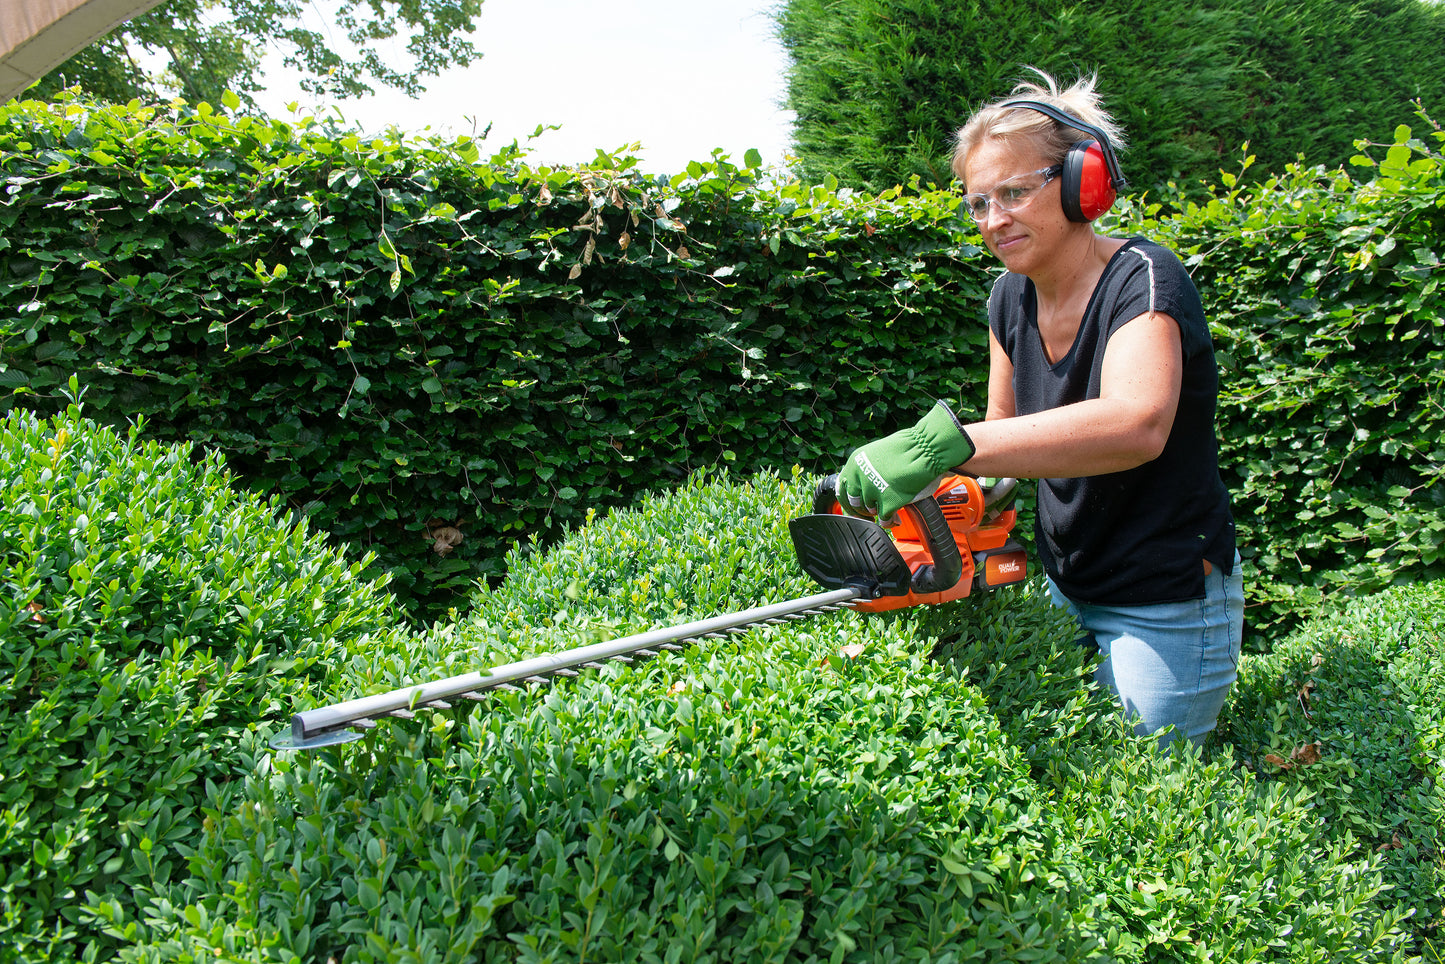 Dual Power - 40V Cordless Hedge Trimmer - 670mm (unit only)